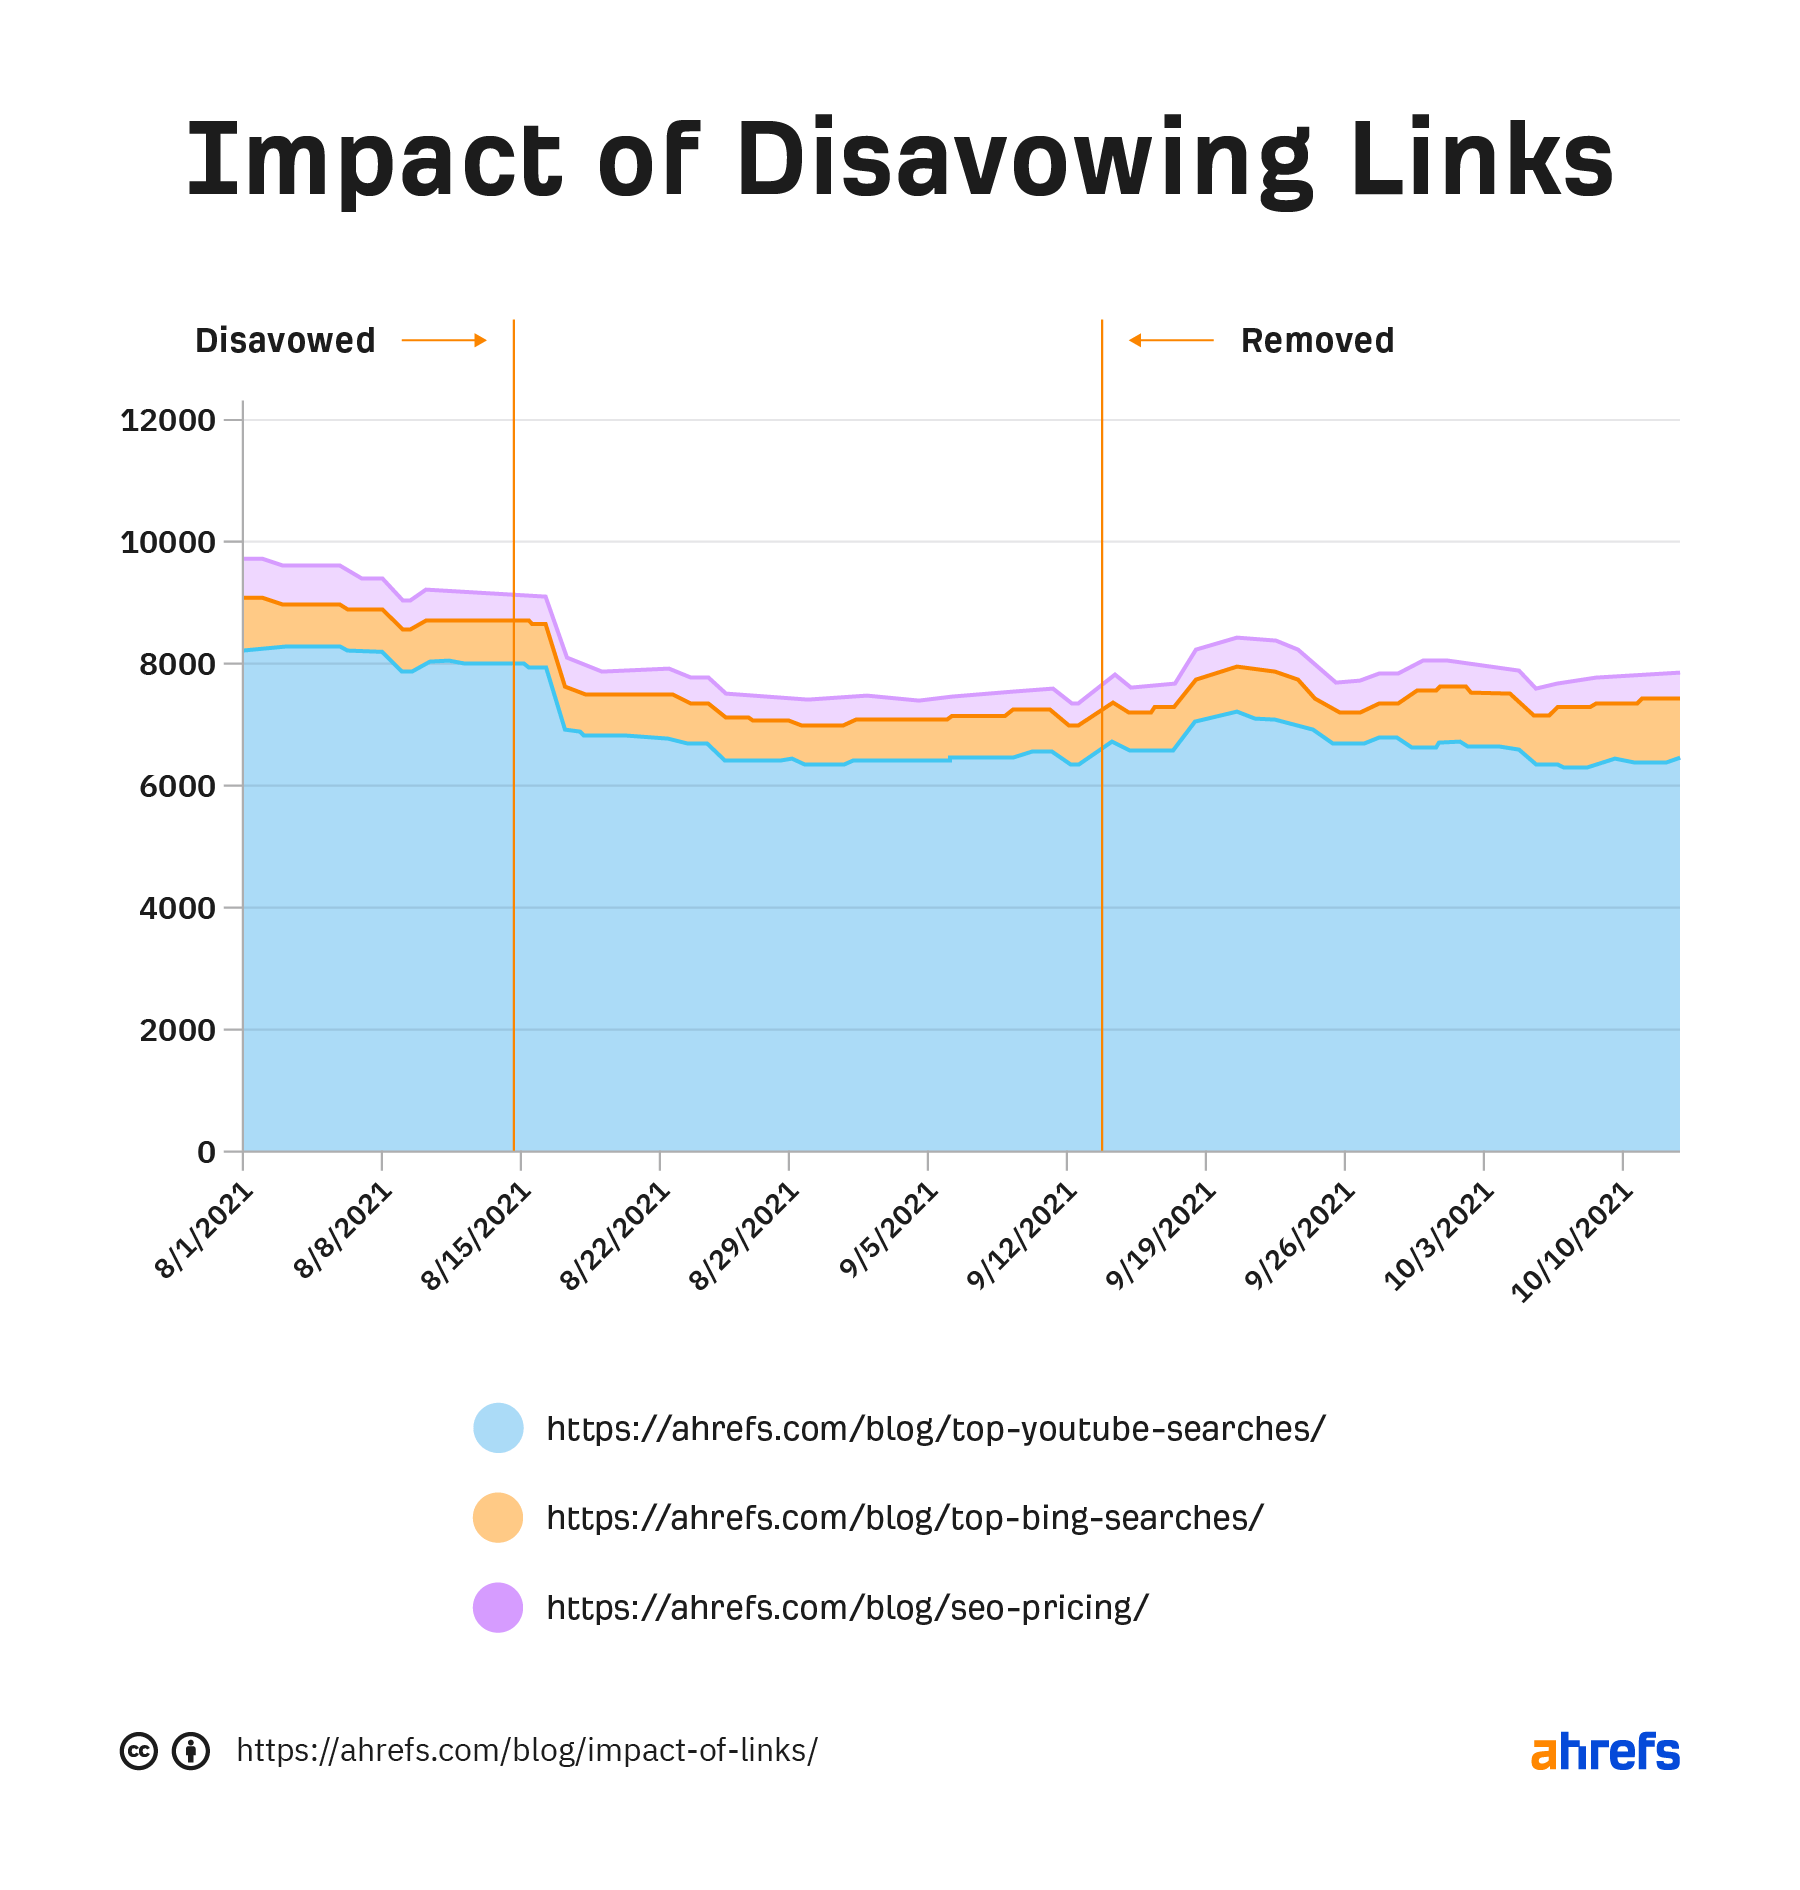 Graph showing the impact of link denial